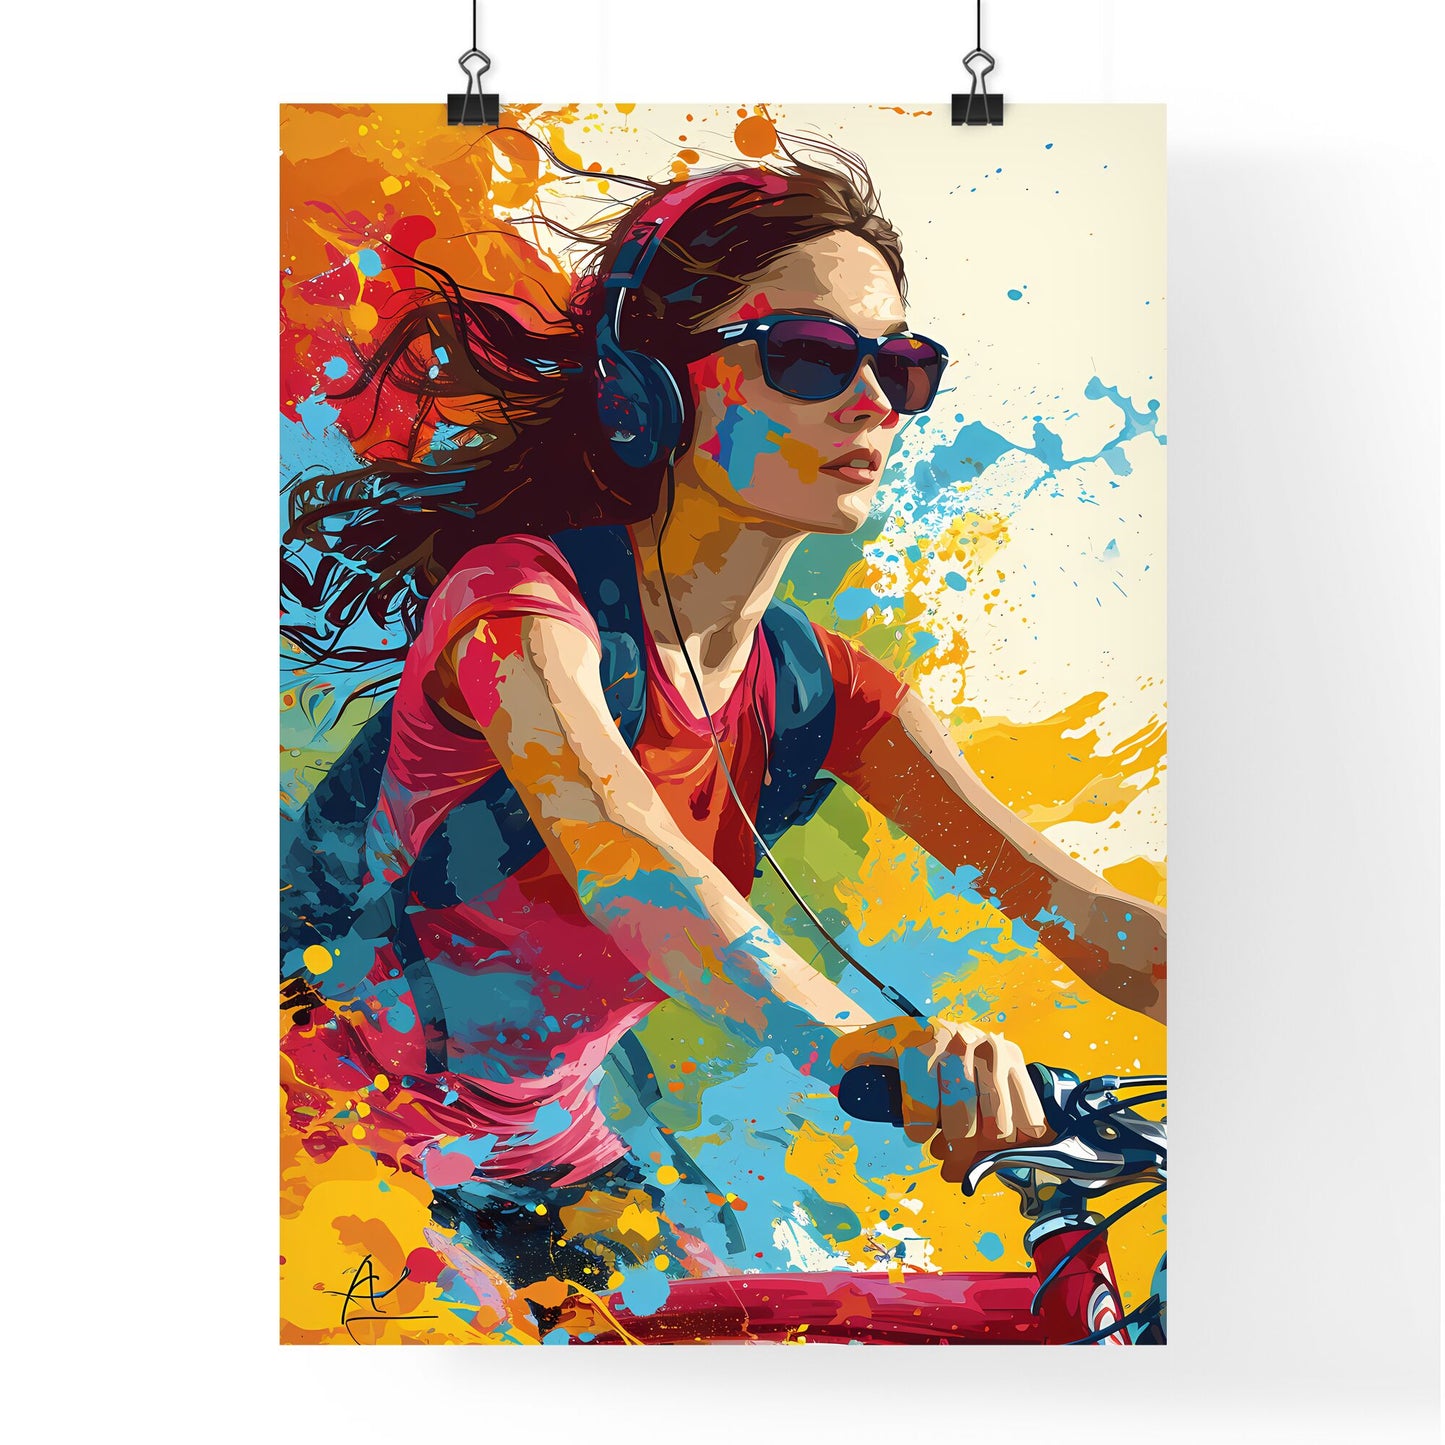 A Poster of an art illustration of a triathlon - A Woman Riding A Bike With Colorful Paint Splashes Default Title